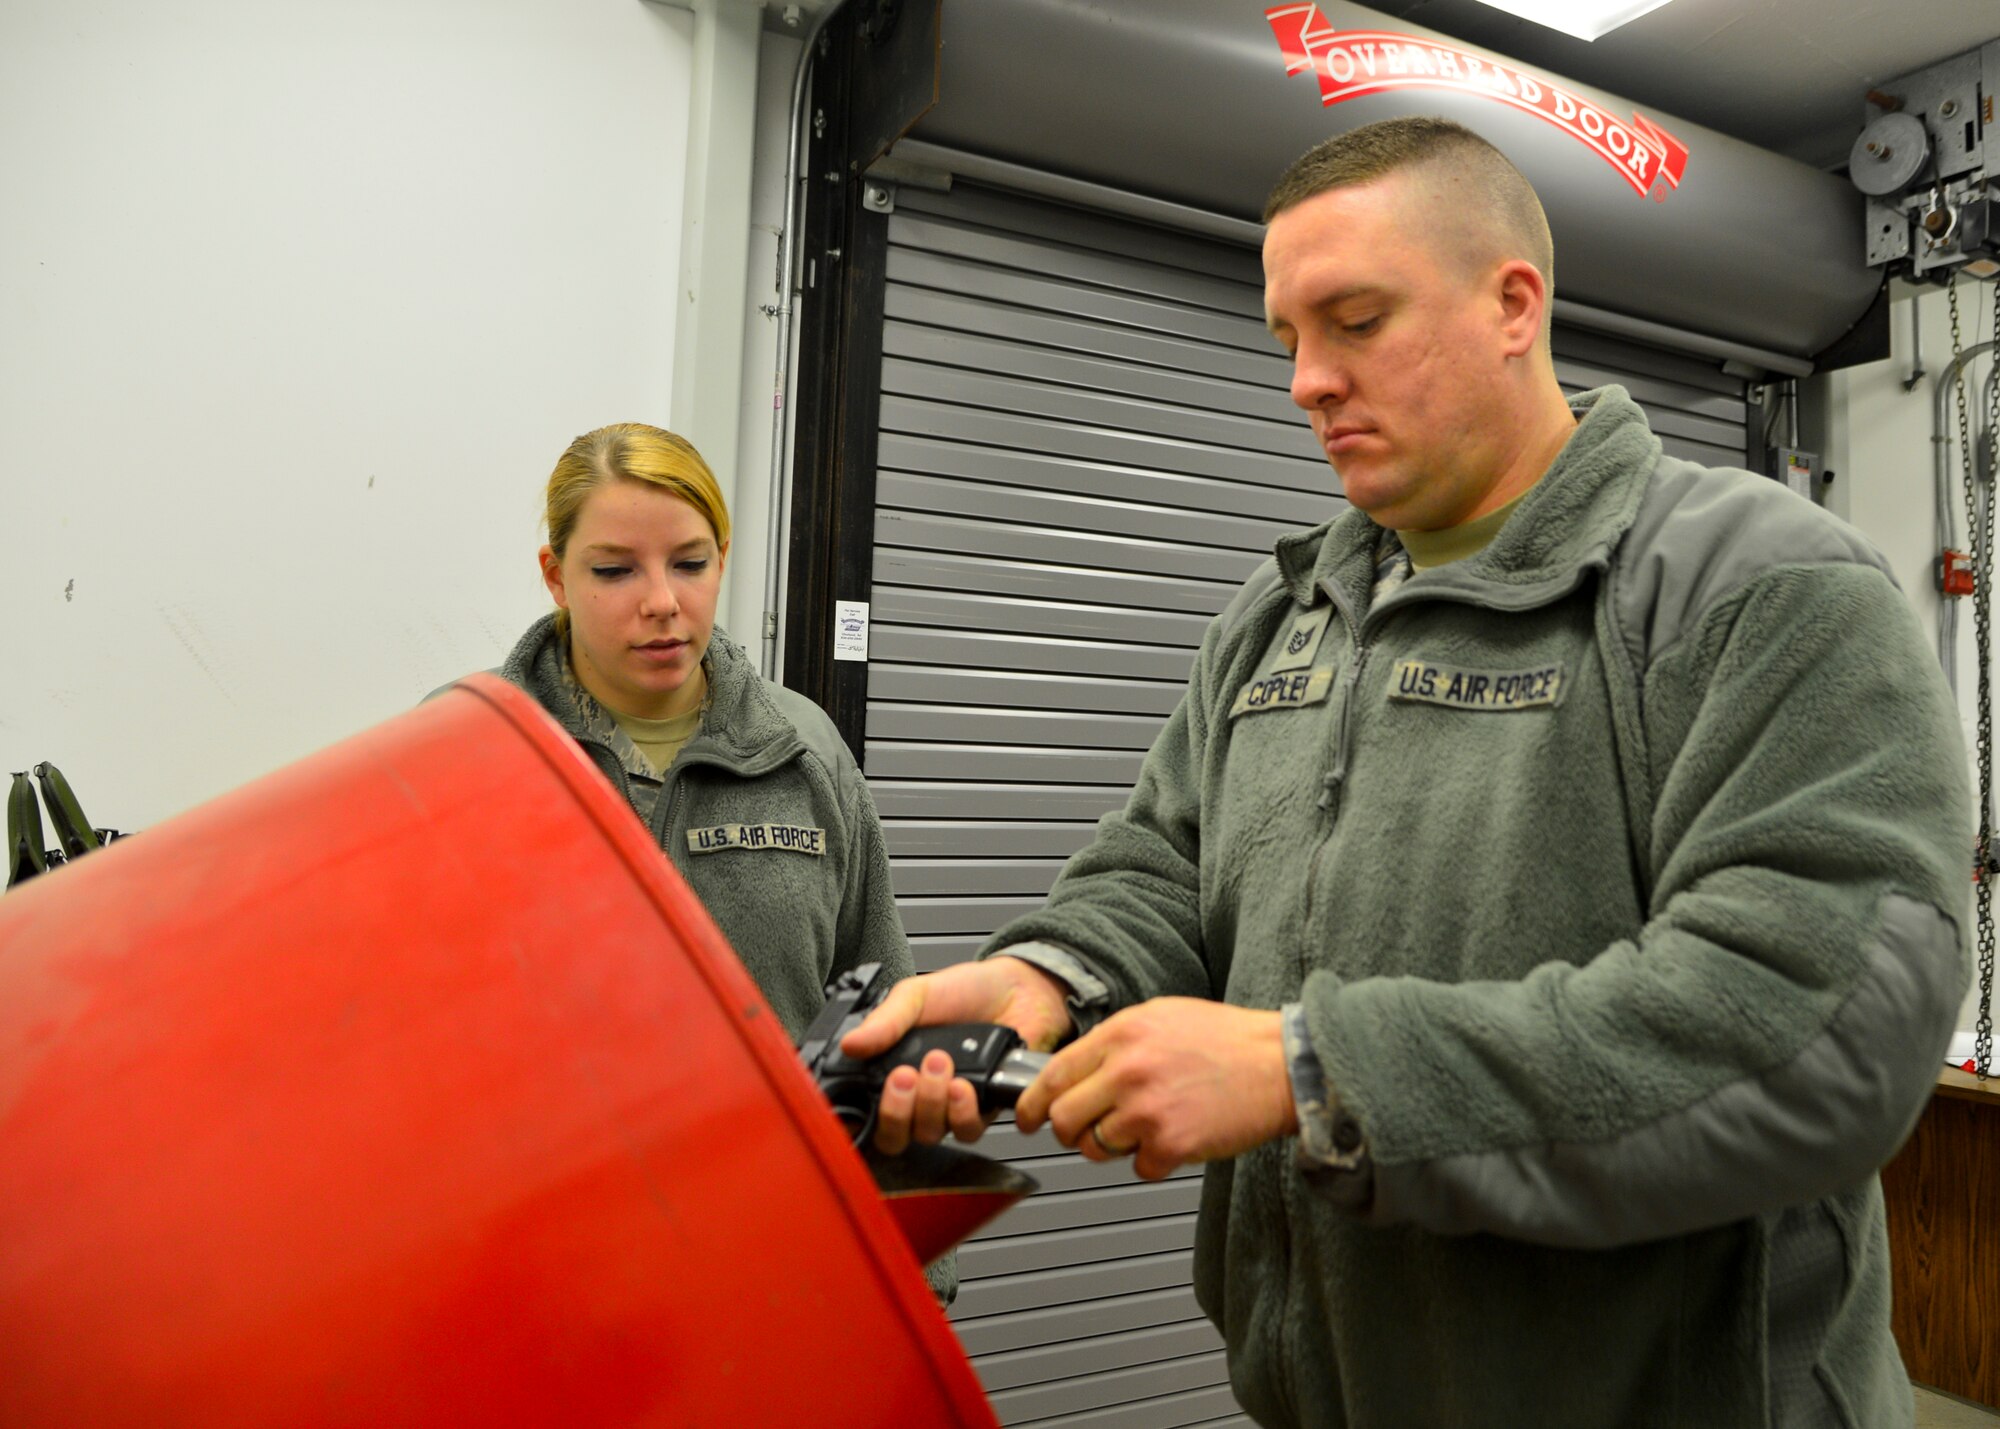 Tech. Sgt. Matt Copley, 436th Logistics Readiness Squadron fuels service center NCO in charge and unit marshal, loads his M9 pistol prior to the start of the duty day Feb. 1, 2016, at Dover Air Force Base, Del. Copley completed the first Unit Marshal Program training class at Dover AFB and is authorized to carry a M9 at his work center during duty hours. (U.S. Air Force photo/Senior Airman William Johnson)